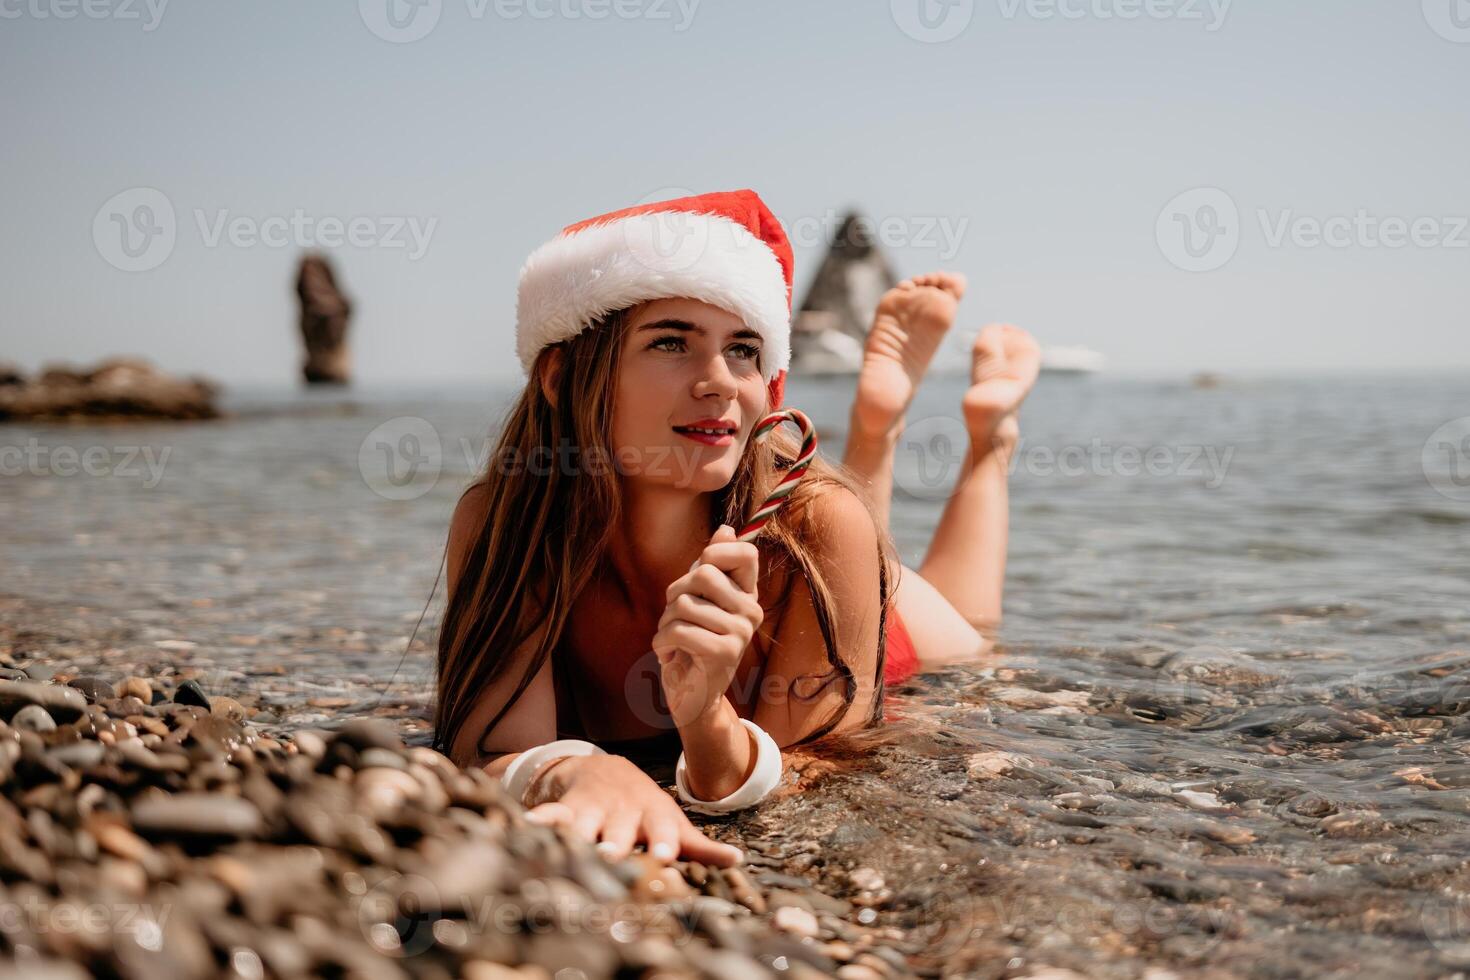 Woman travel sea. Happy tourist enjoy taking picture on the beach for memories. Woman traveler in Santa hat looks at camera on the sea bay, sharing travel adventure journey photo